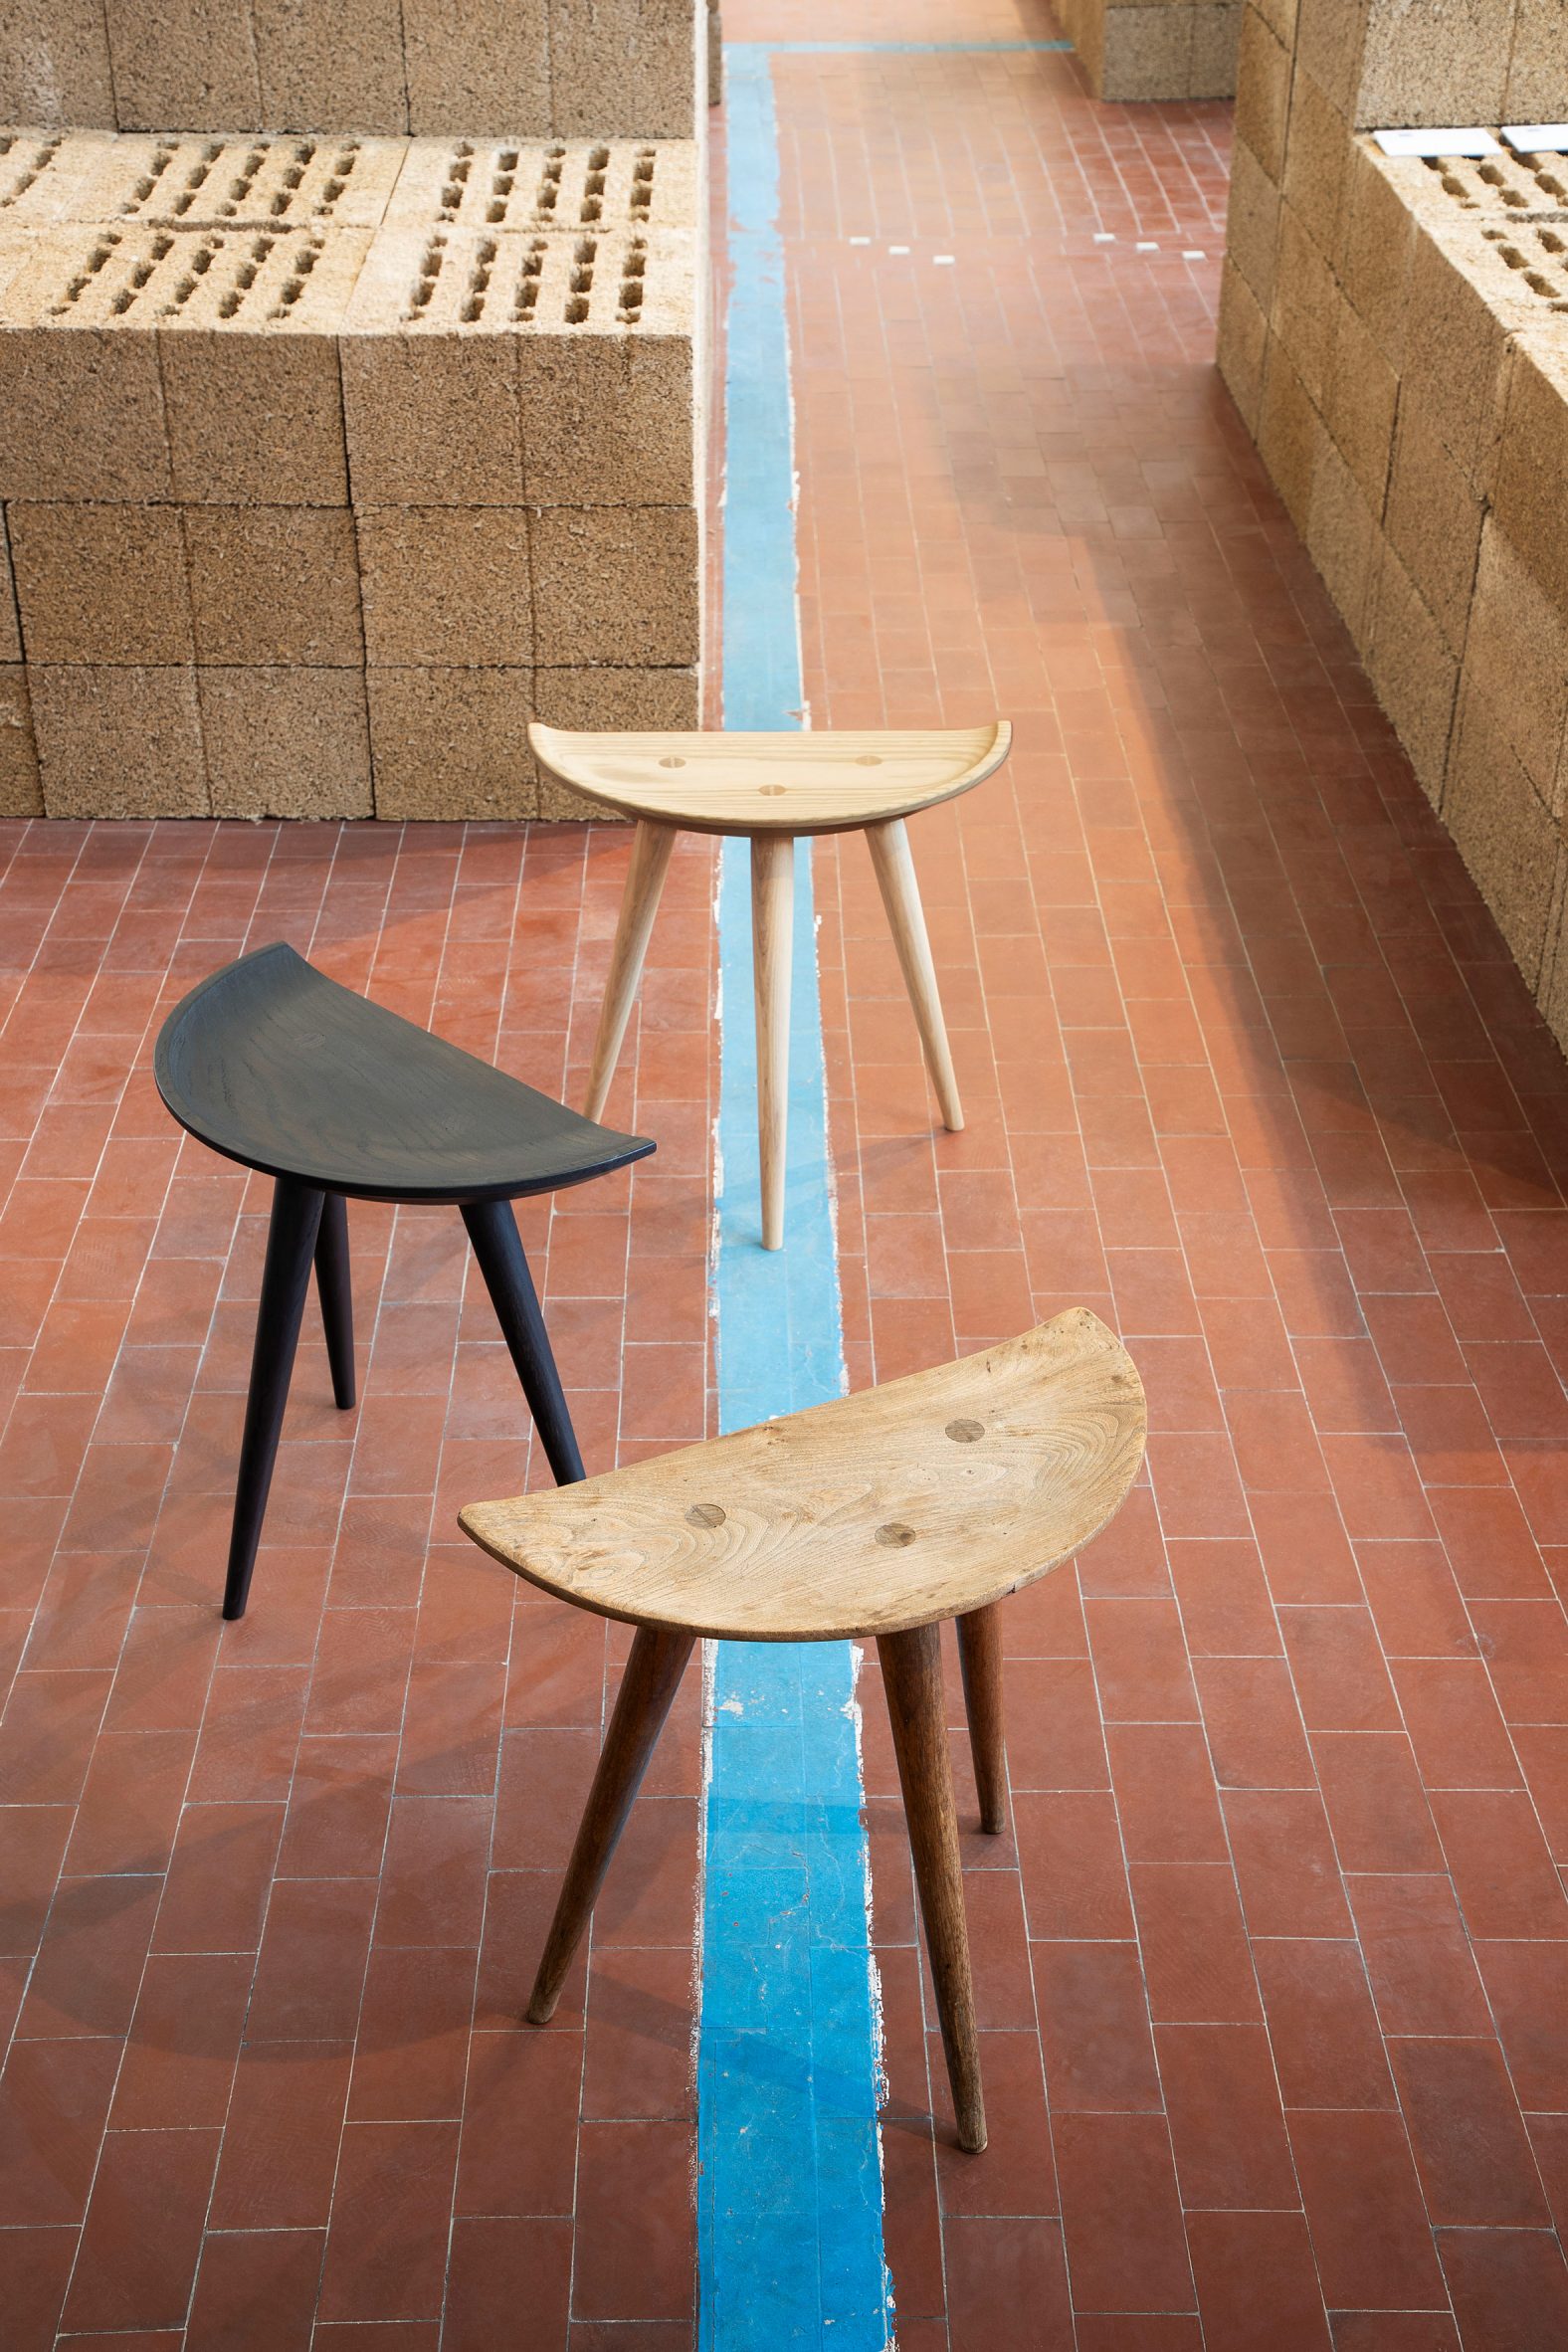 Central Stool in Tamart furniture exhibition in Milan